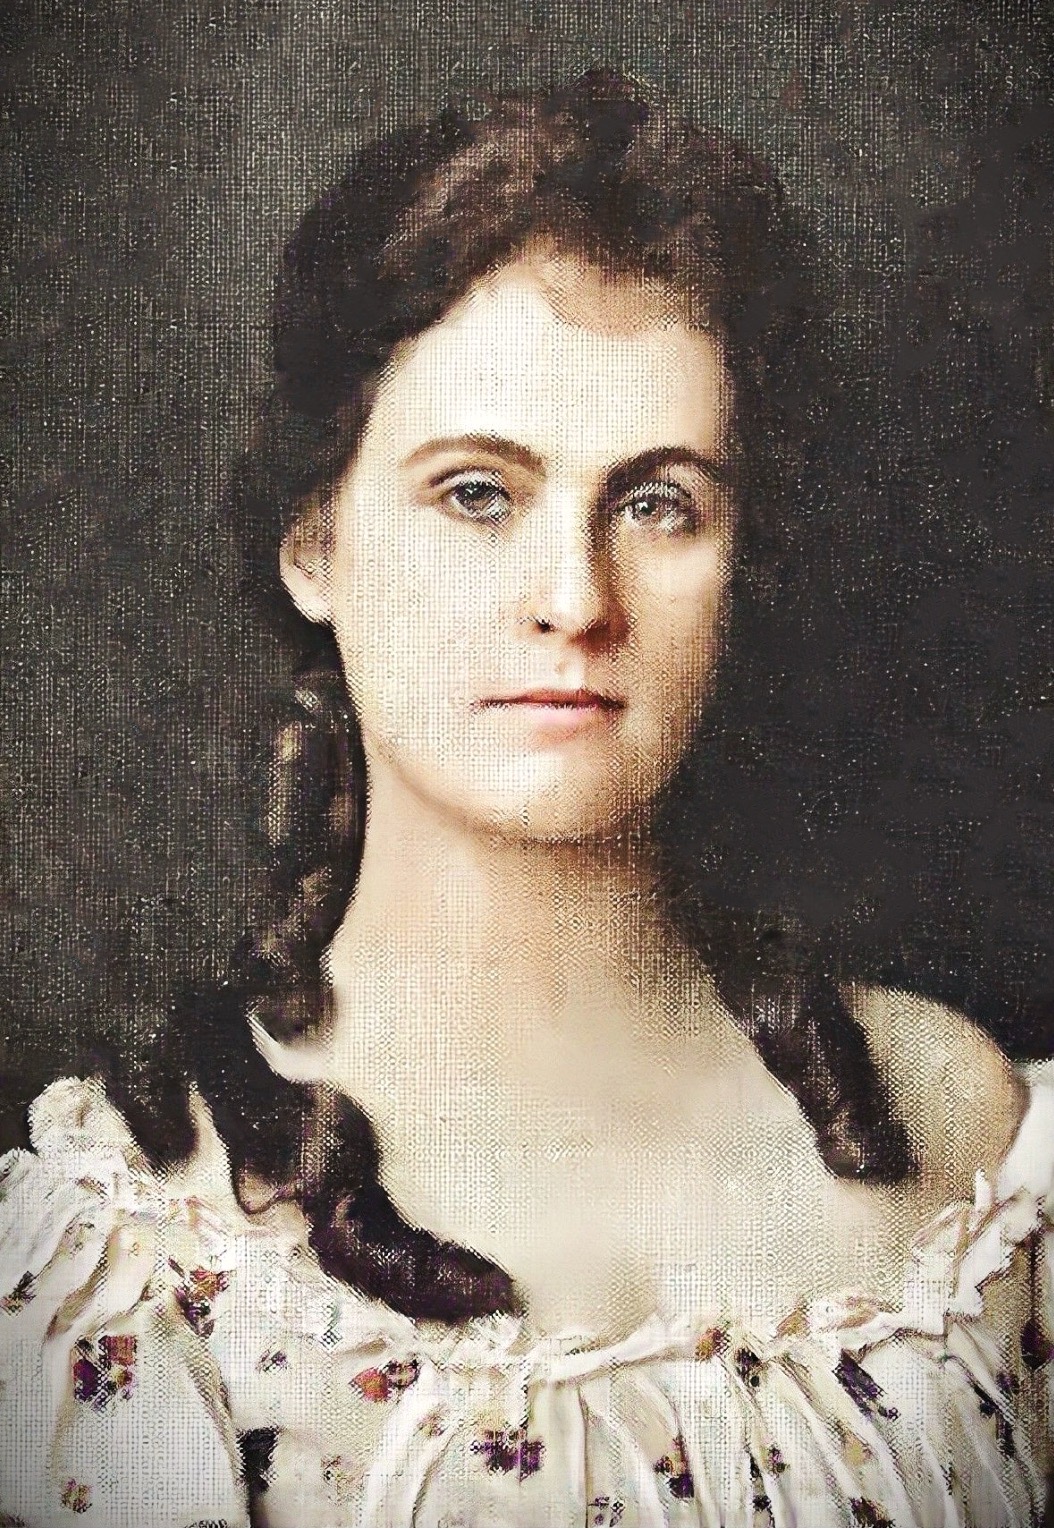 Cora Baggerly Older as a young woman